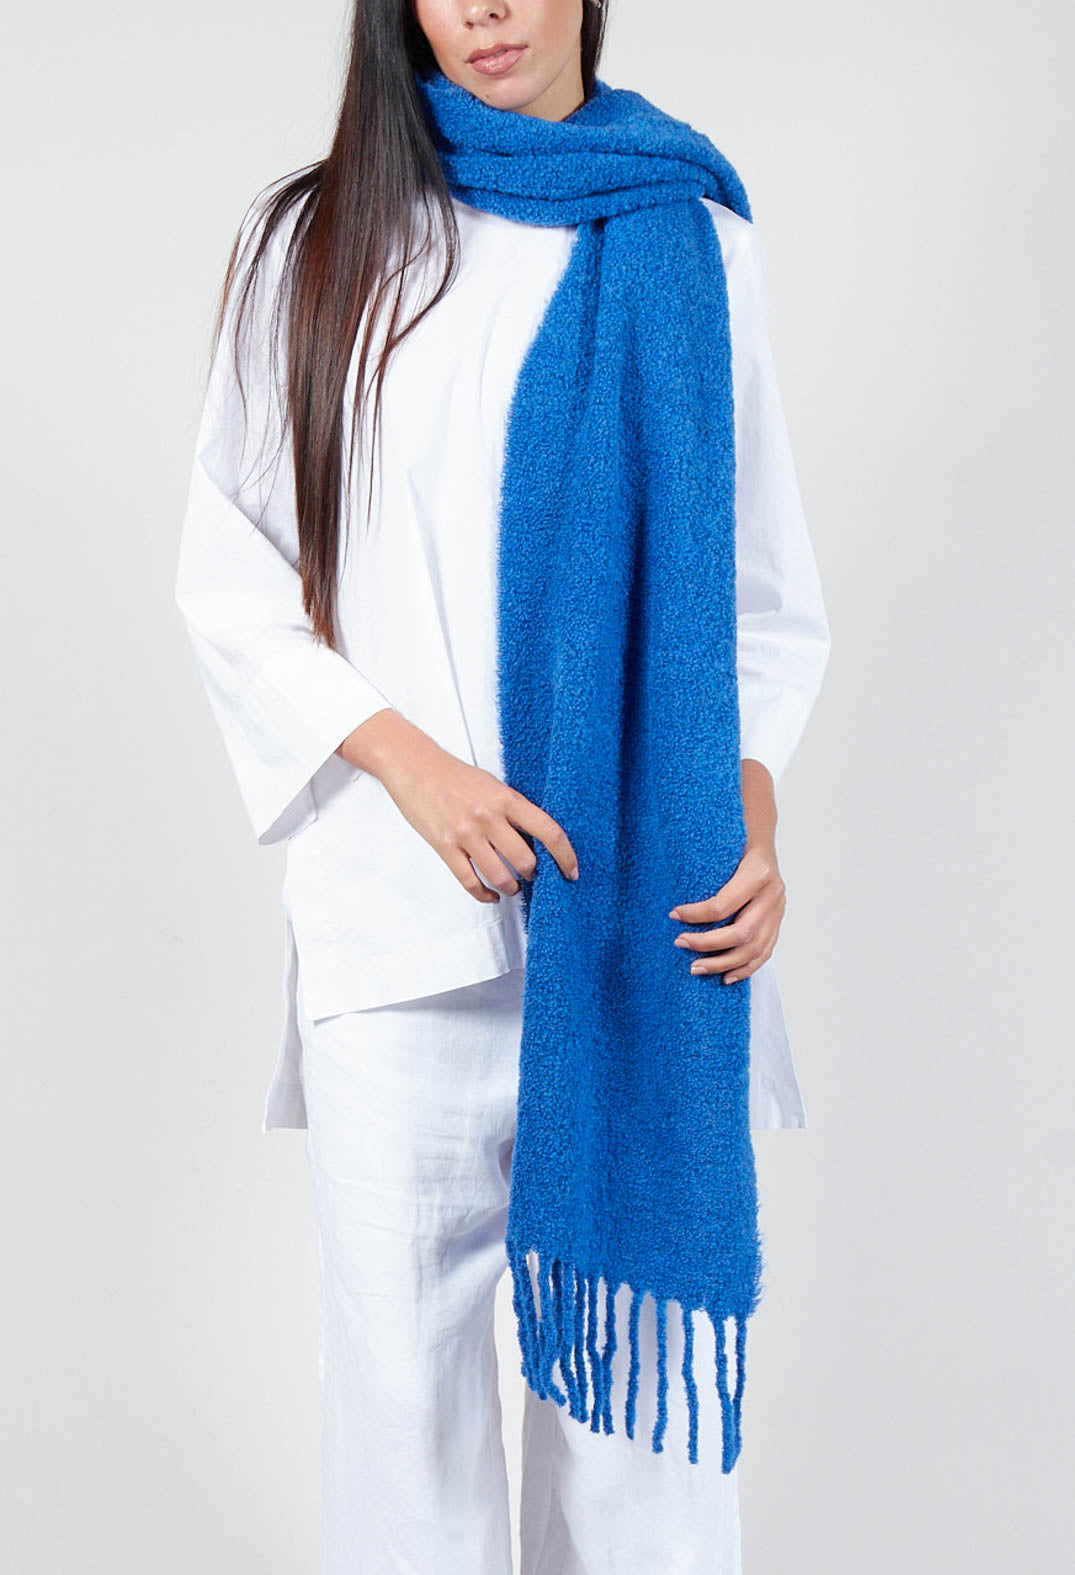 lady wearing a deep sky blue scarf over a long sleeve white top